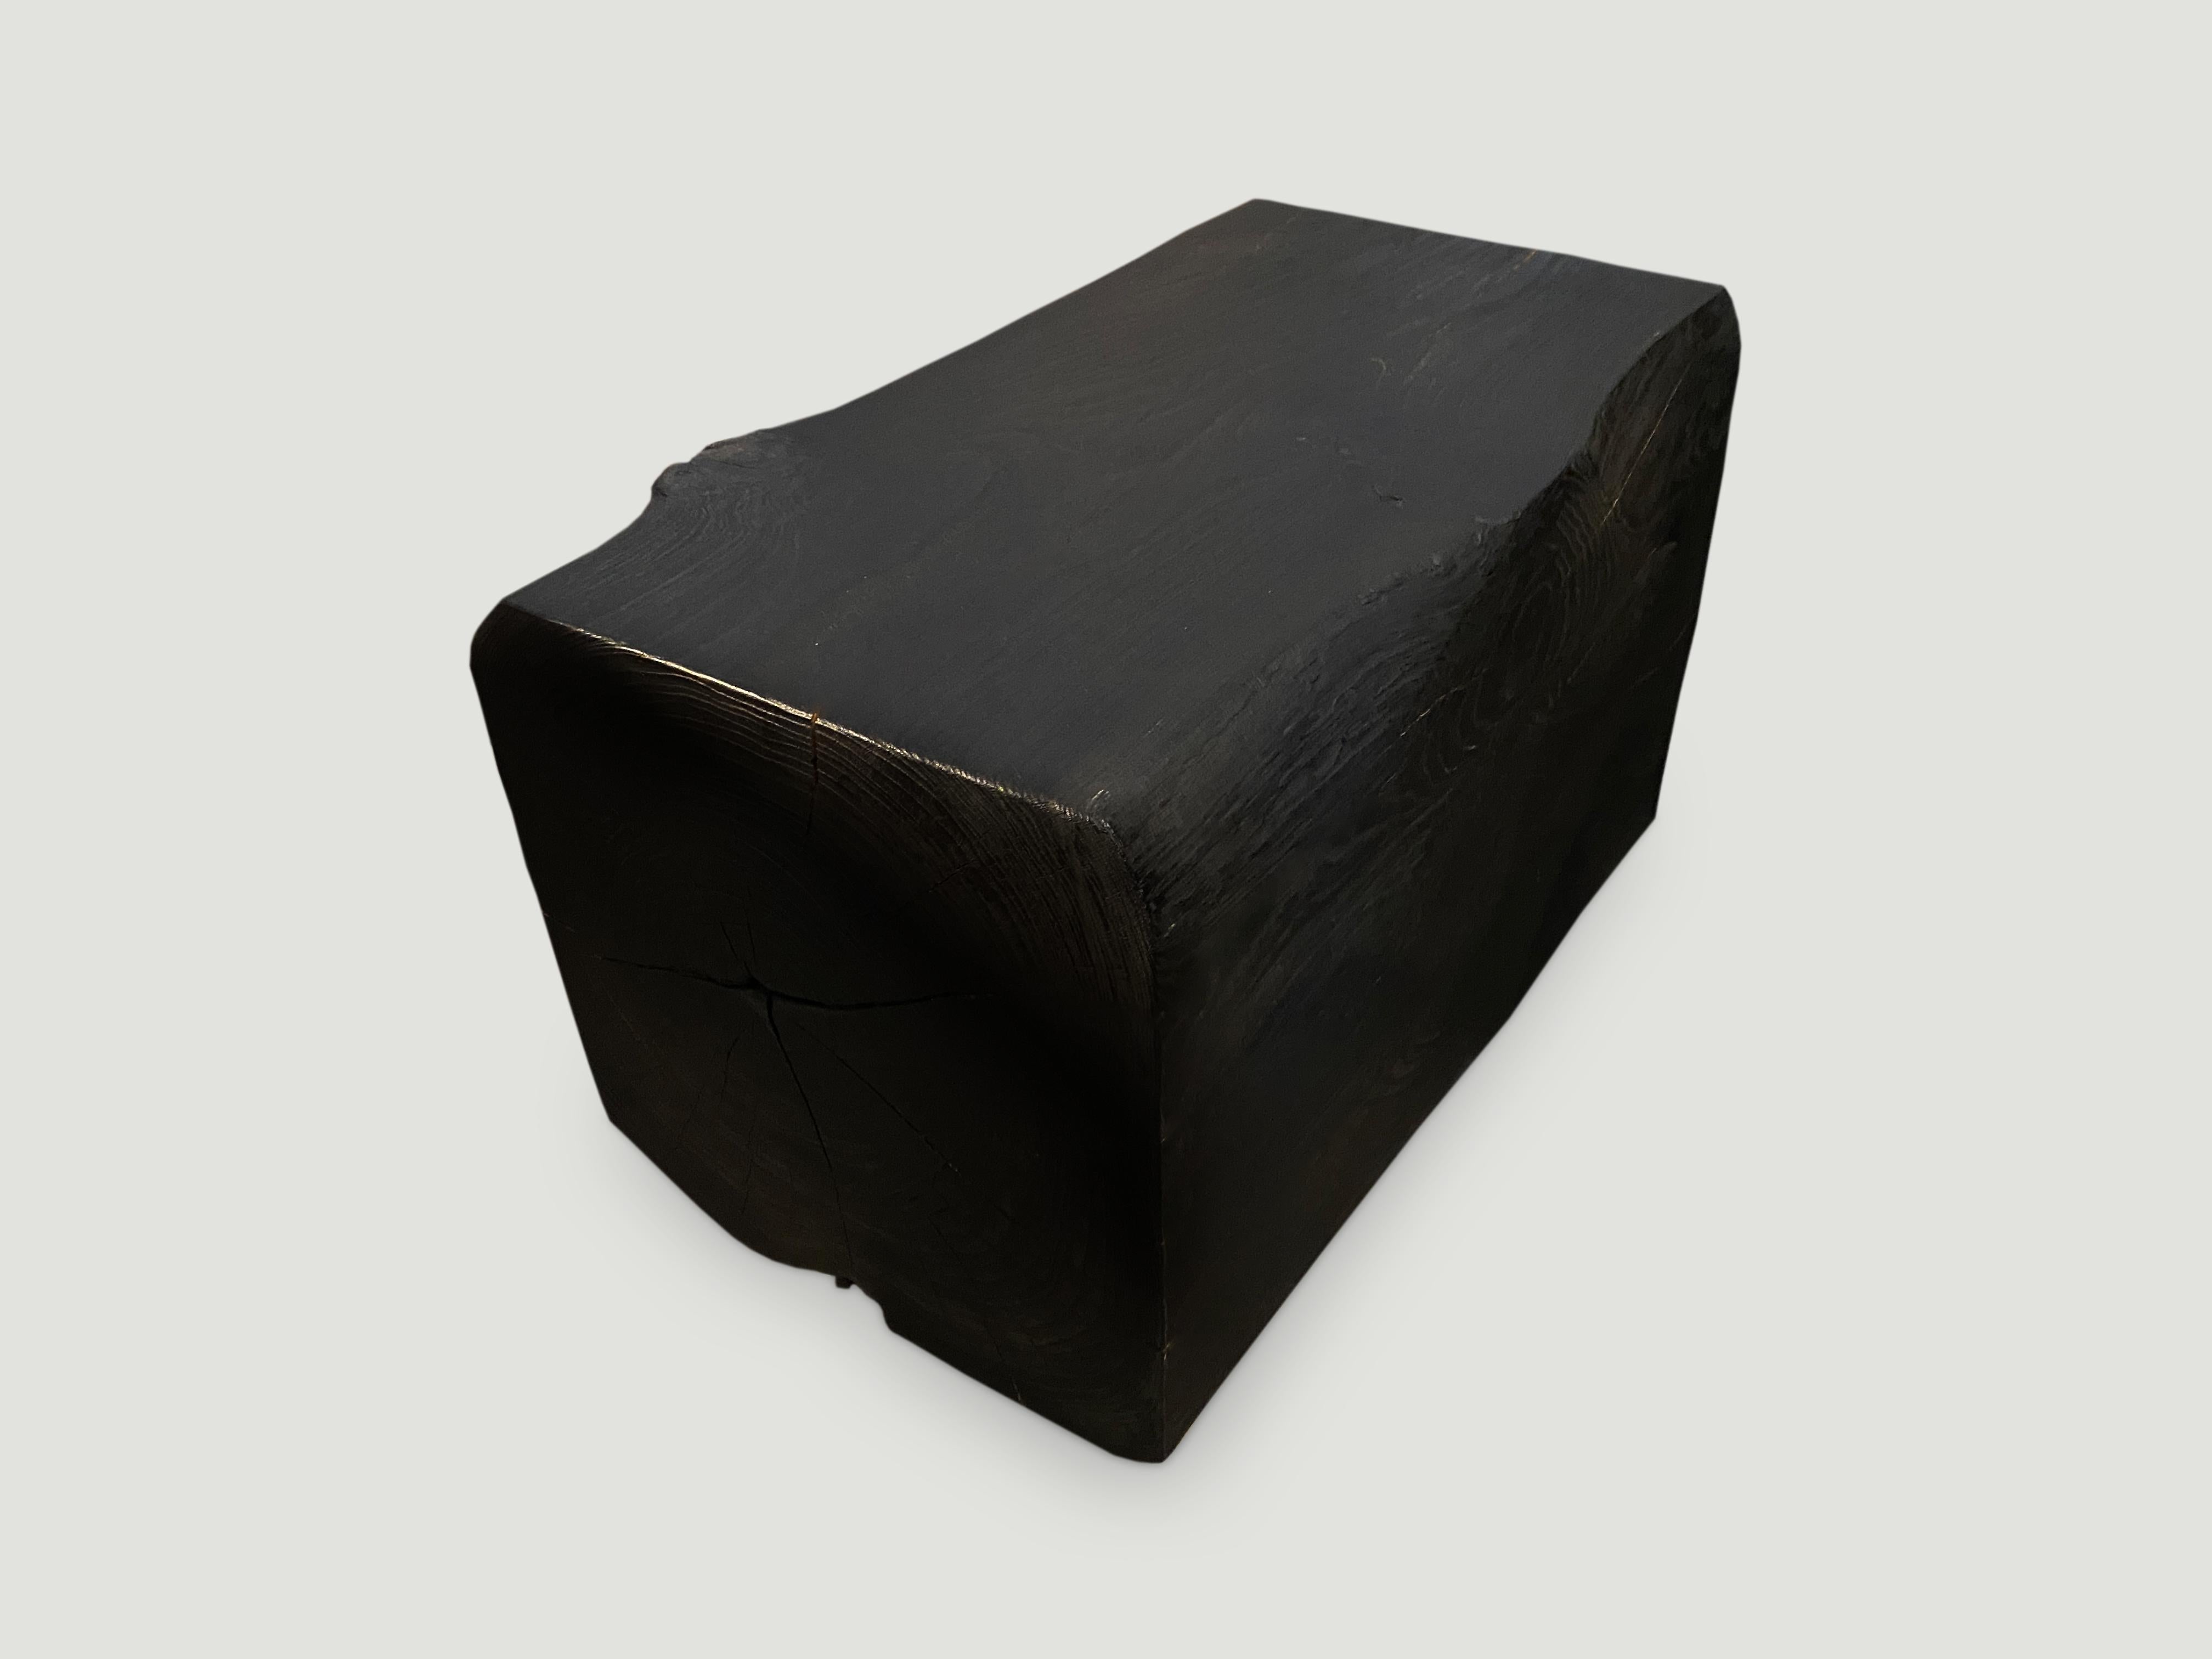 Andrianna Shamaris Charred Teak Wood Log Bench or Coffee Table In Excellent Condition For Sale In New York, NY